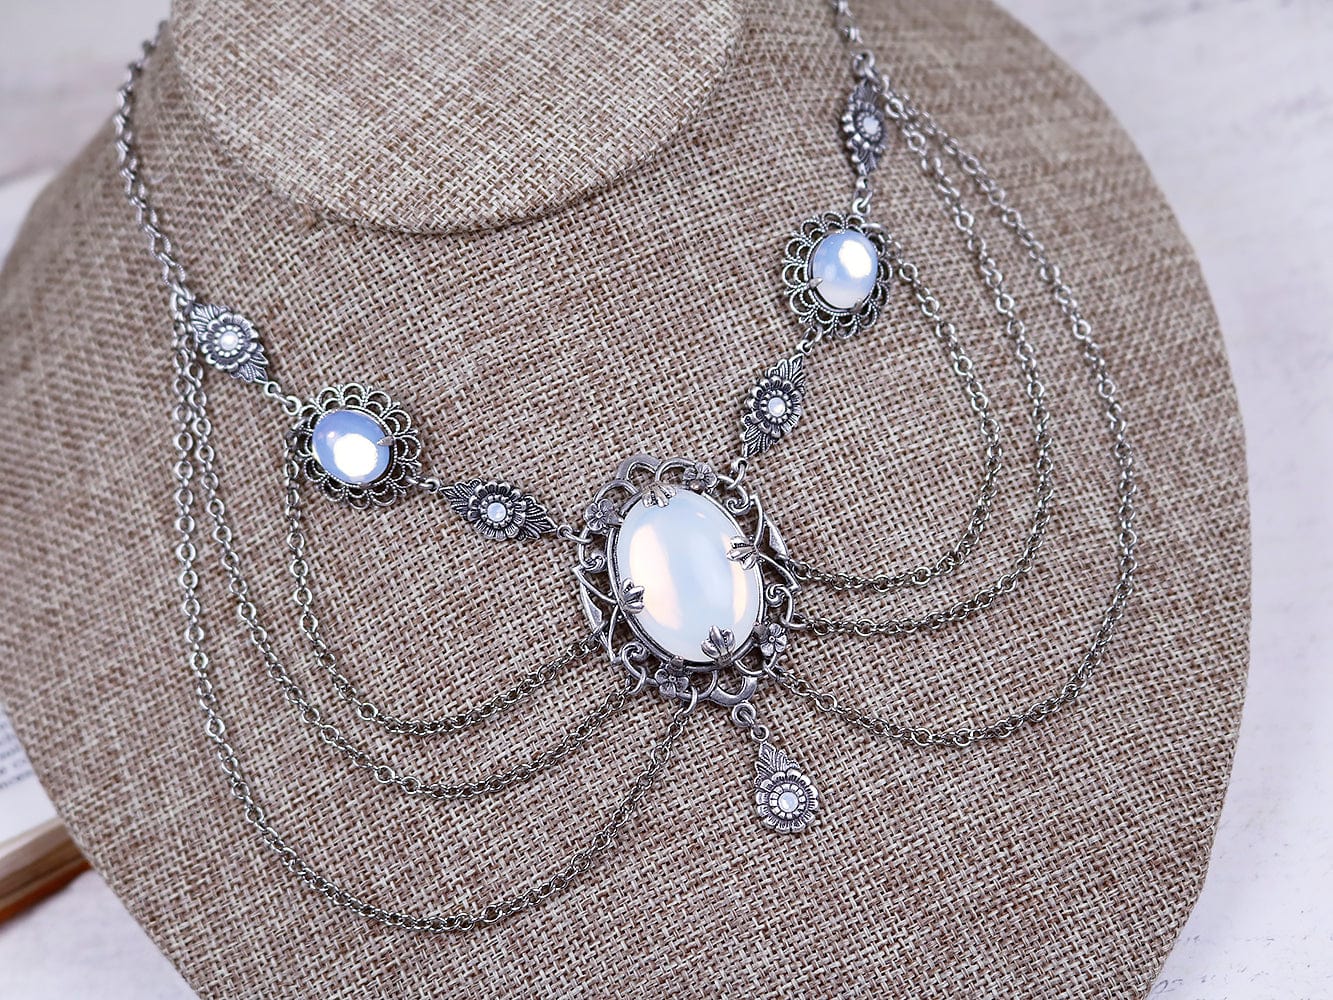 Drucilla Necklace in White Opal and Antiqued Silver by Rabbitwood and Reason